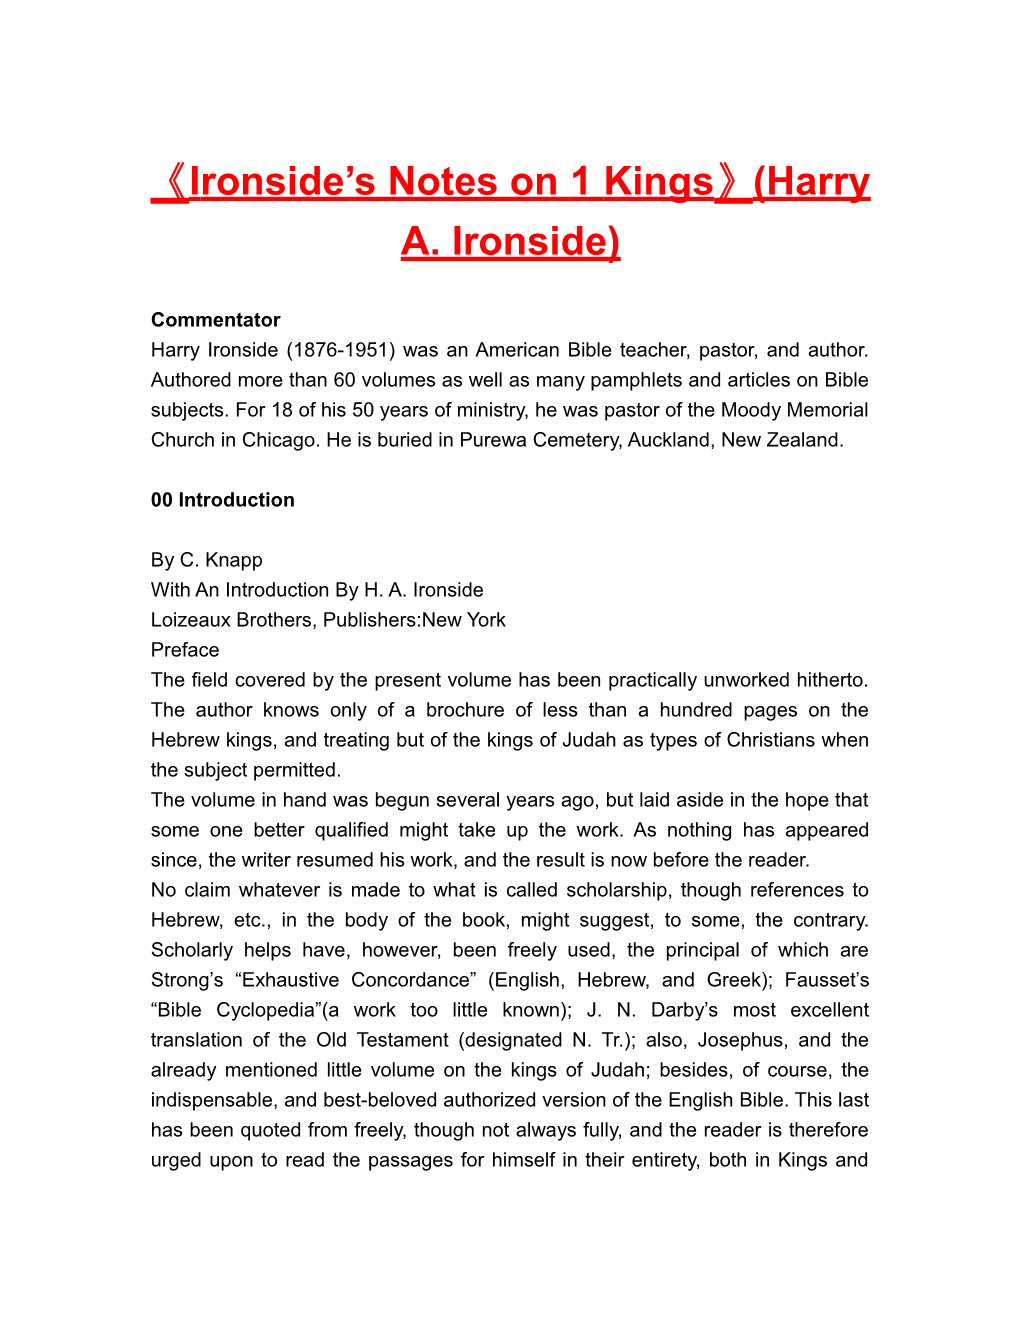 Ironside S Notes on 1 Kings (Harry A. Ironside)